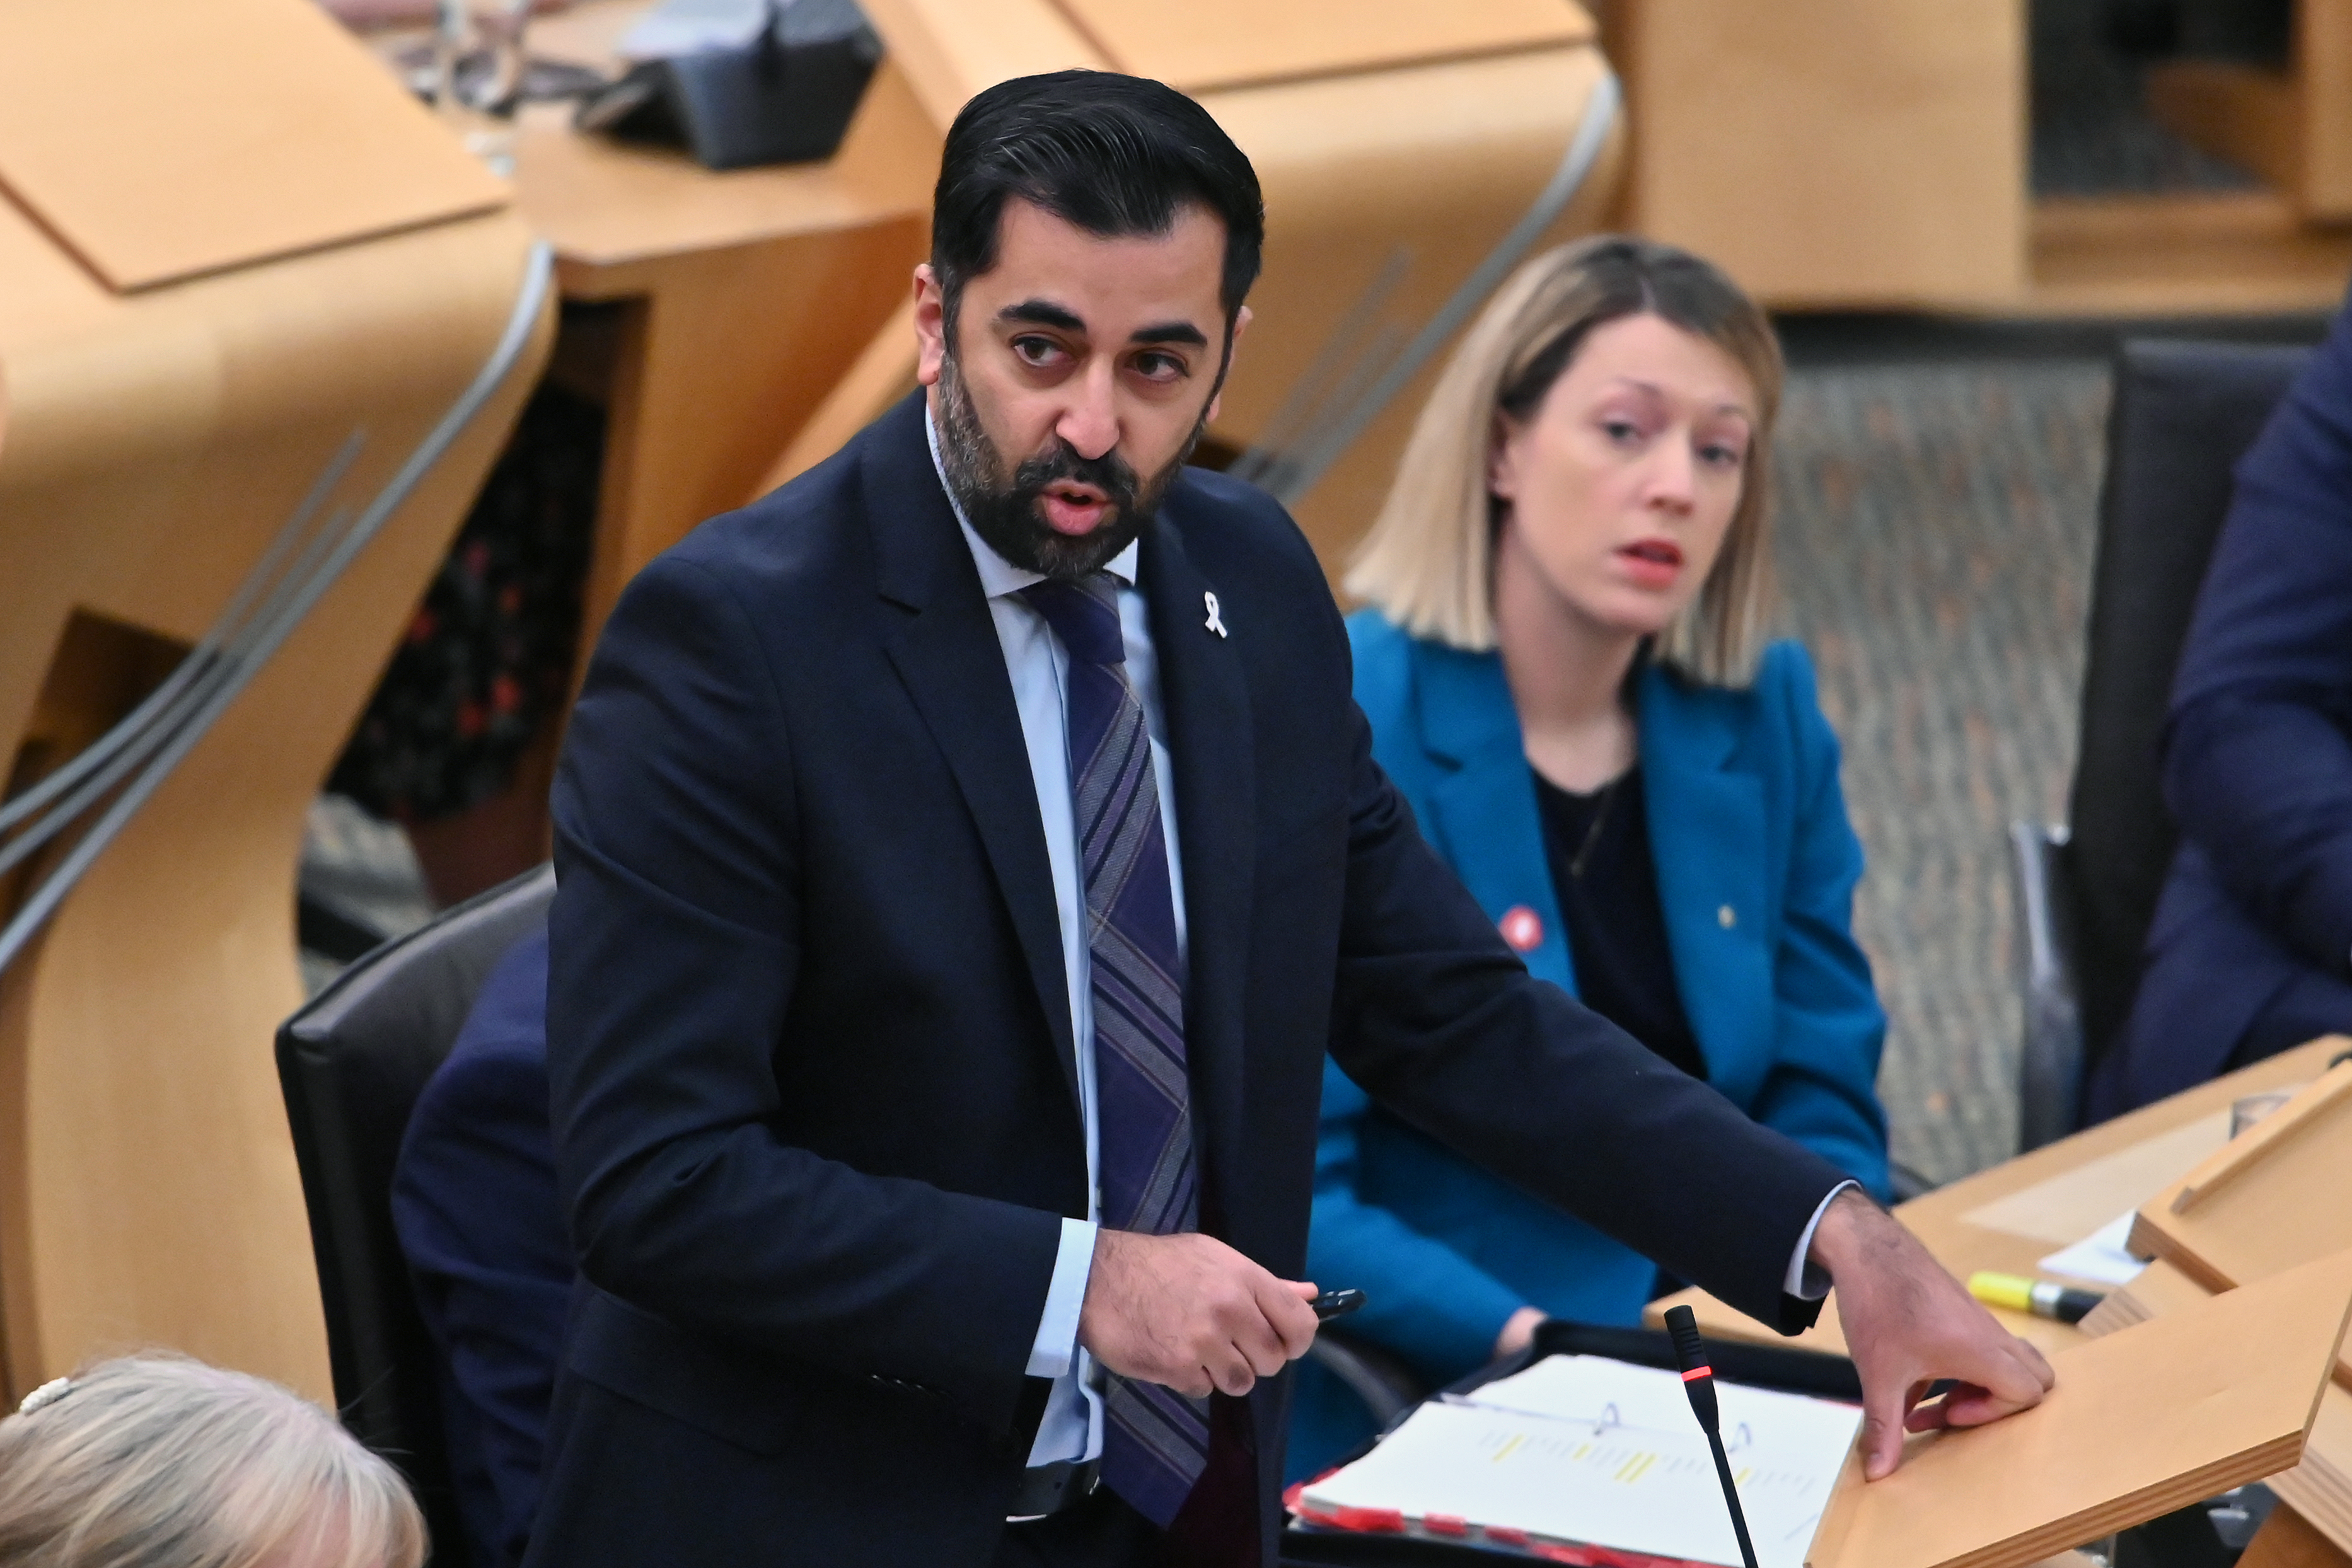 Humza Yousaf said Scotland will replicate measures to restrict XL bullies taken in England and Wales.